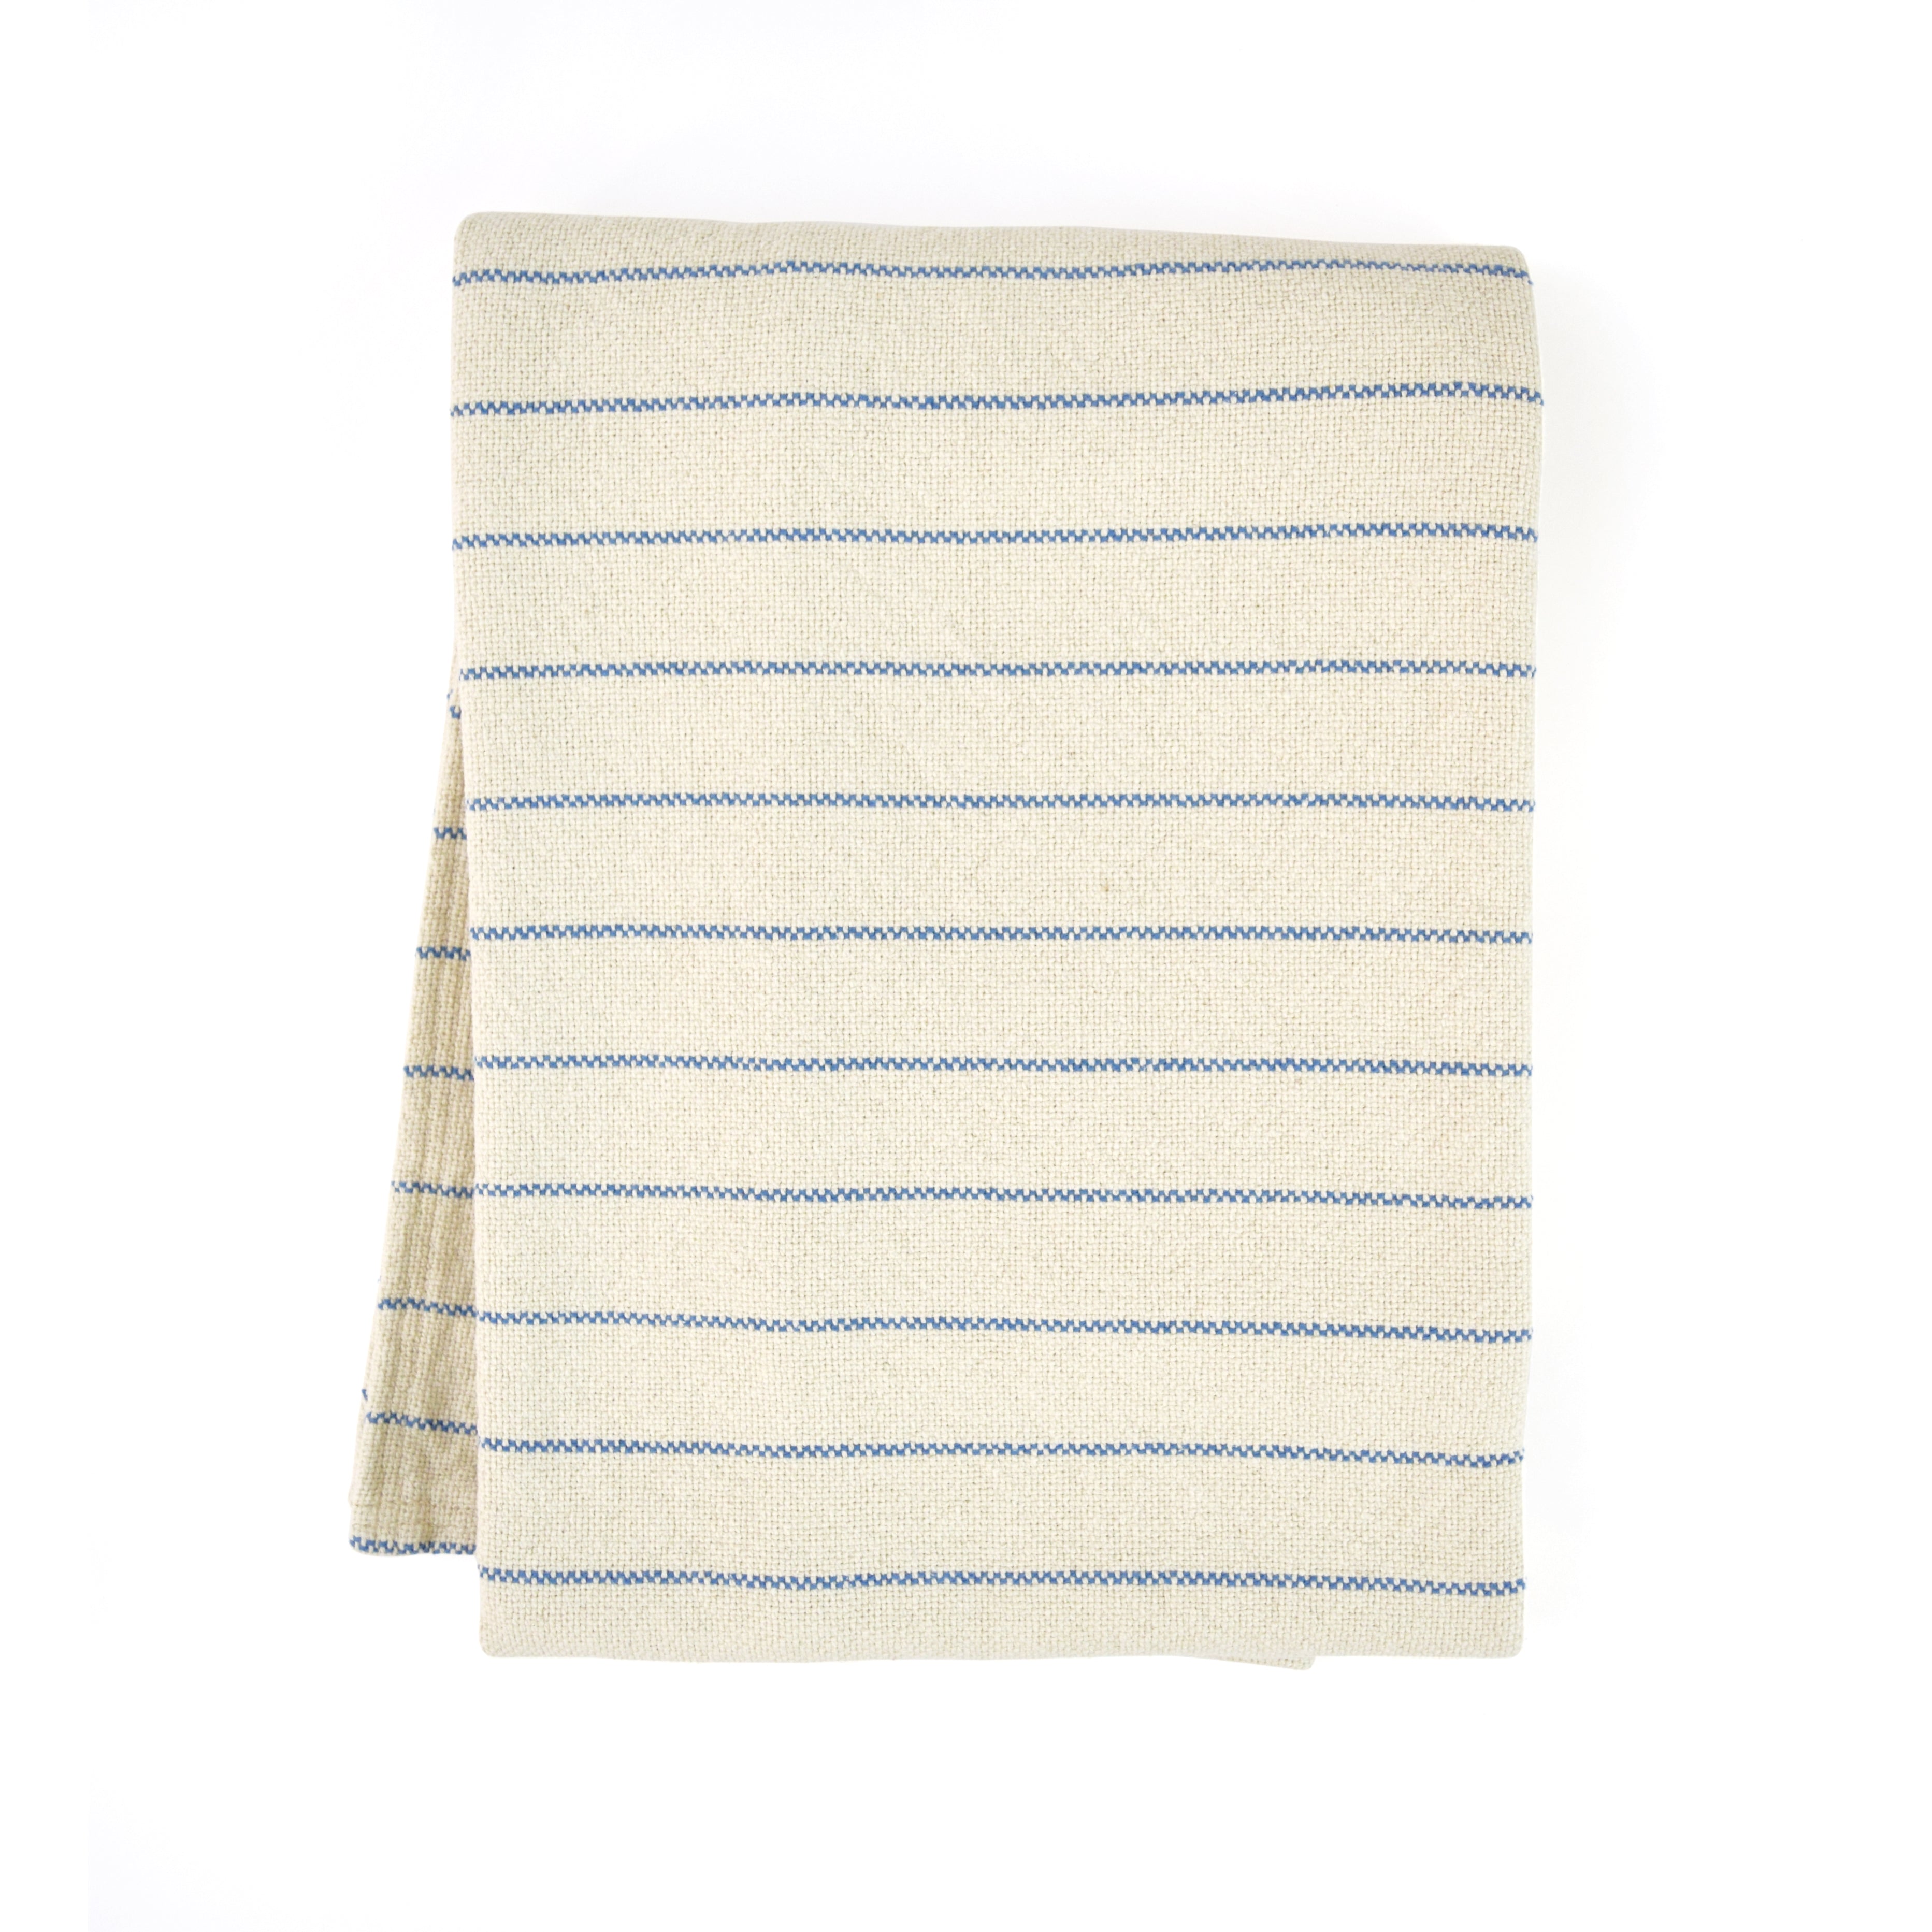 Cotton Towels Made in USA - American Blanket Company